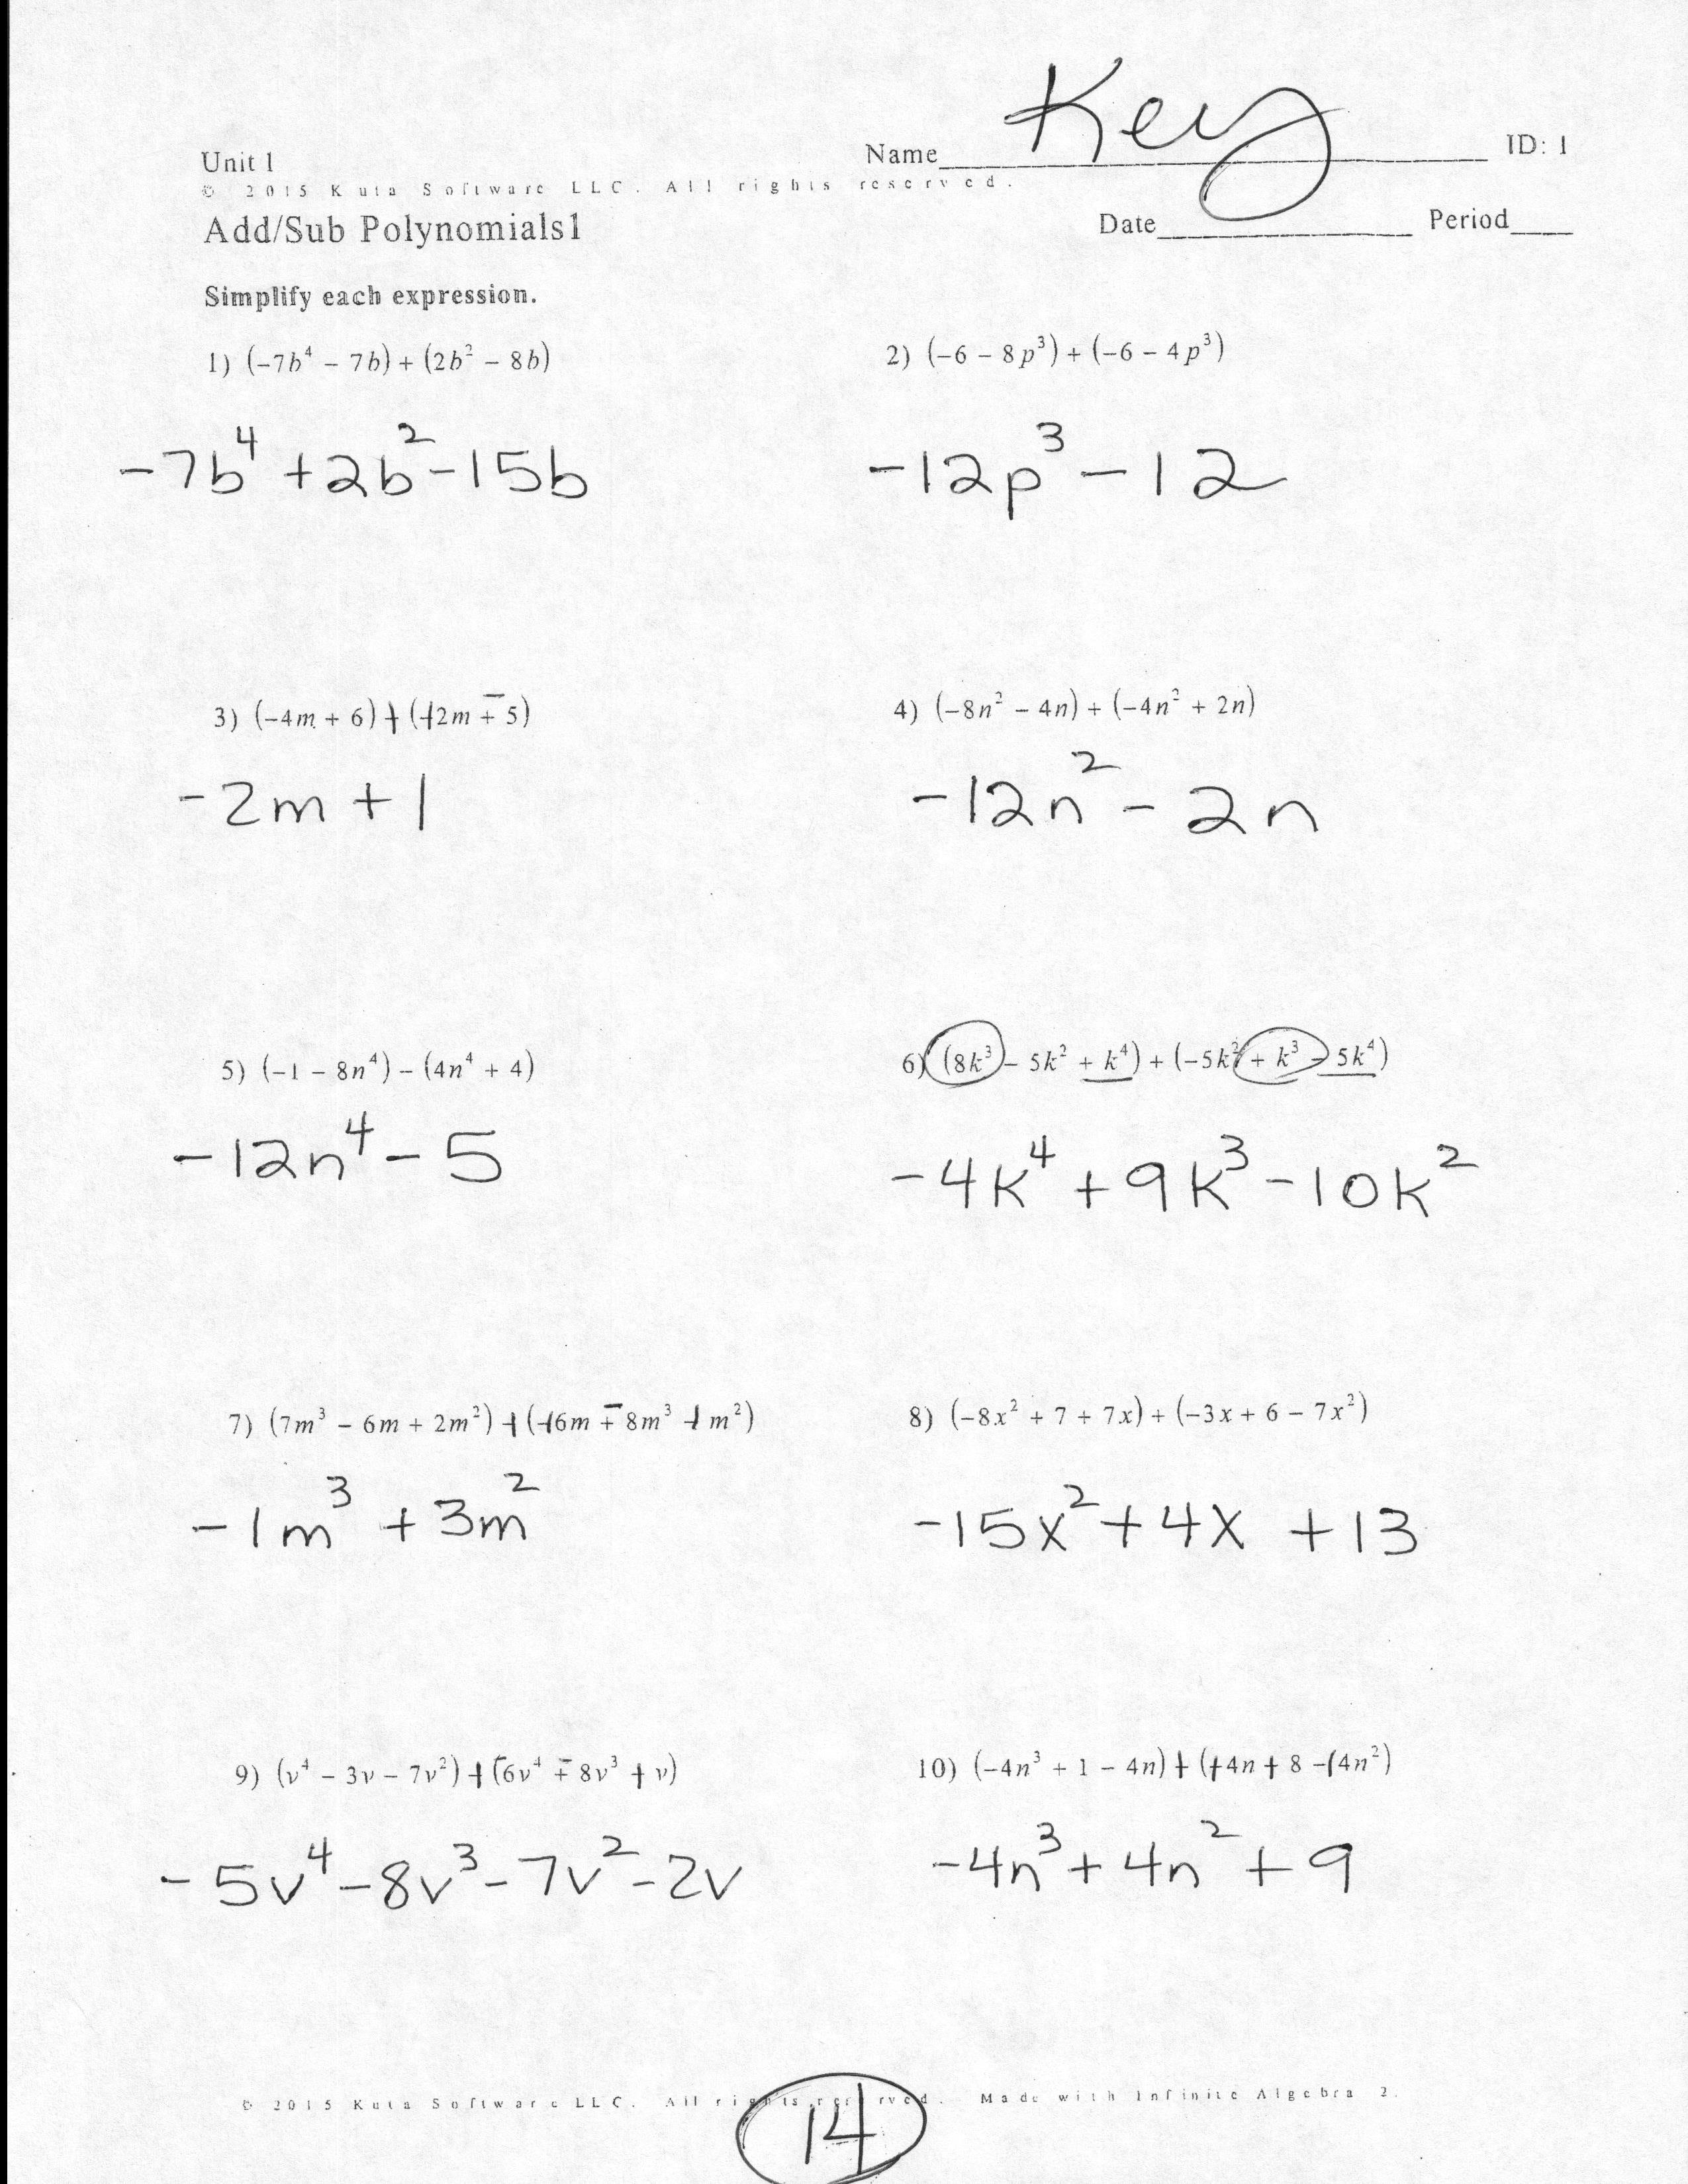 Adding And Subtracting Polynomials Worksheet Answers Algebra 1 The Regarding Adding And Subtracting Polynomials Worksheet Answers